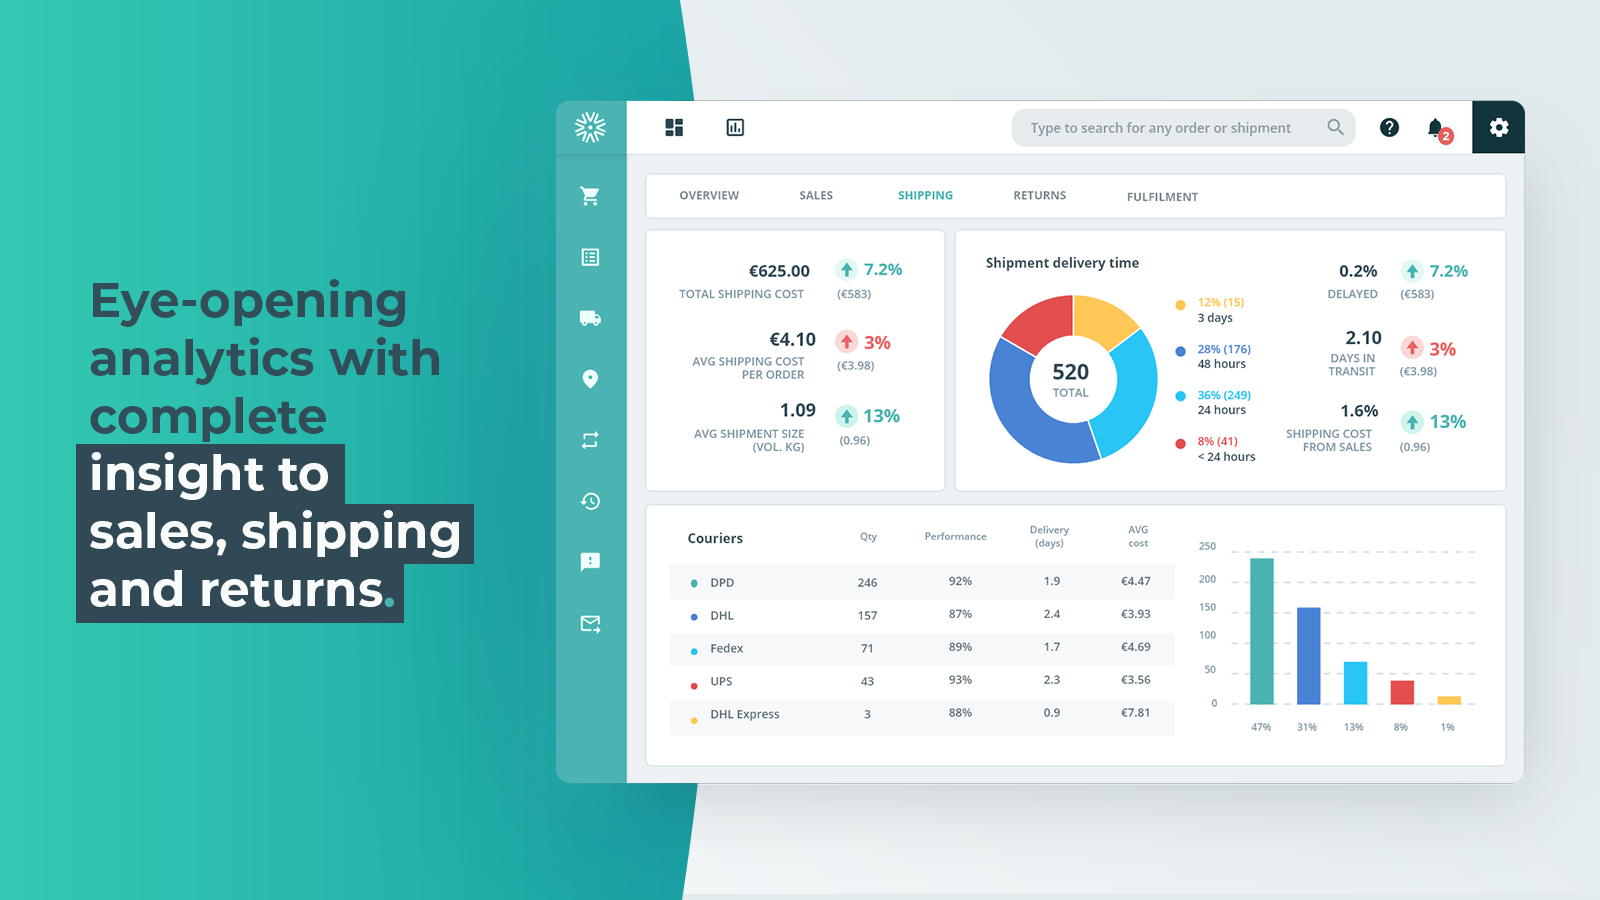 Eye-opening analytics with complete insight to sales, shipping and returns